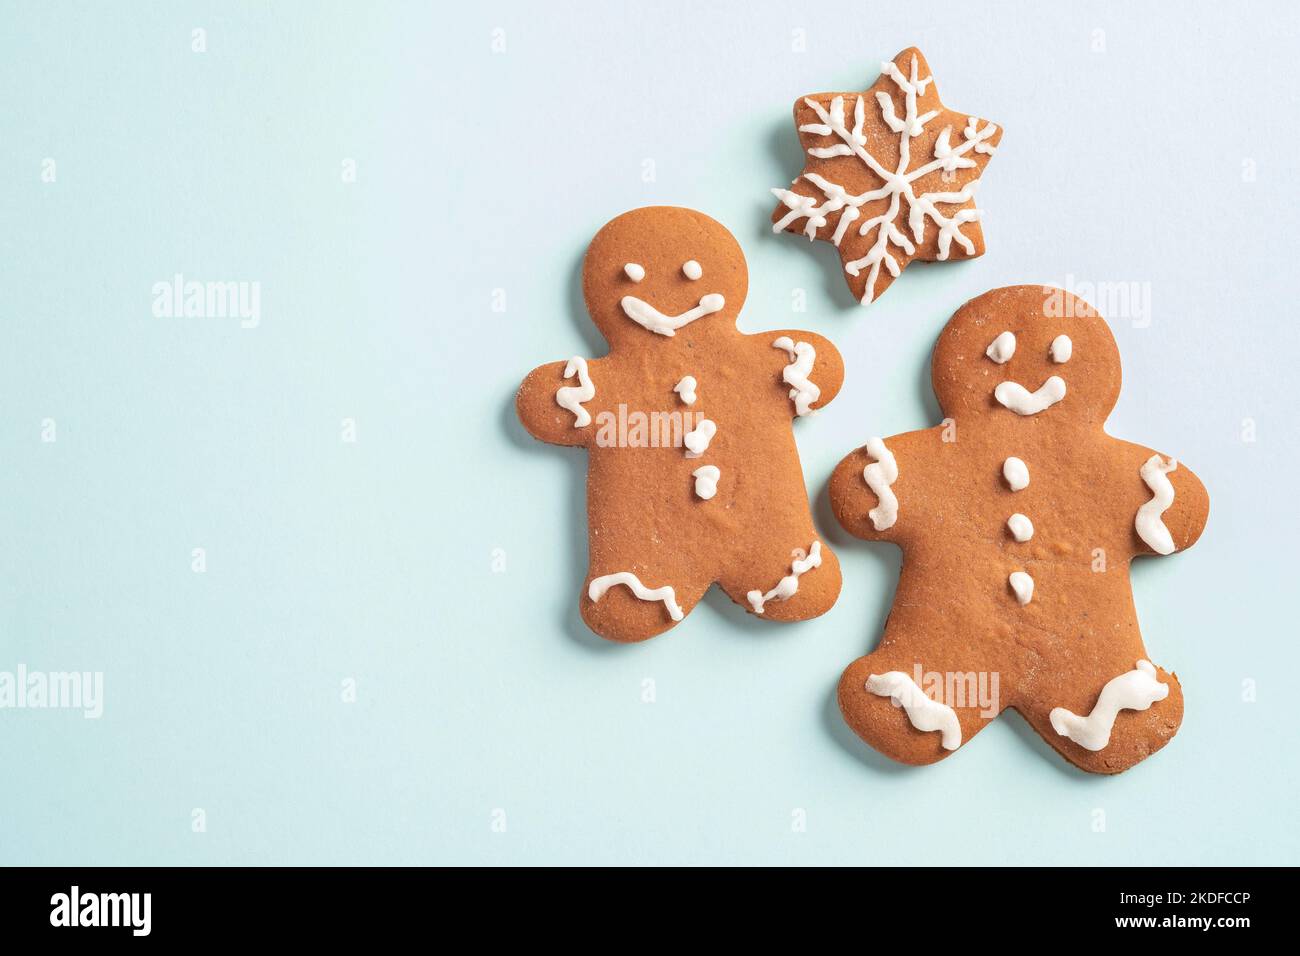 ugly Gingerbread man Stock Photo